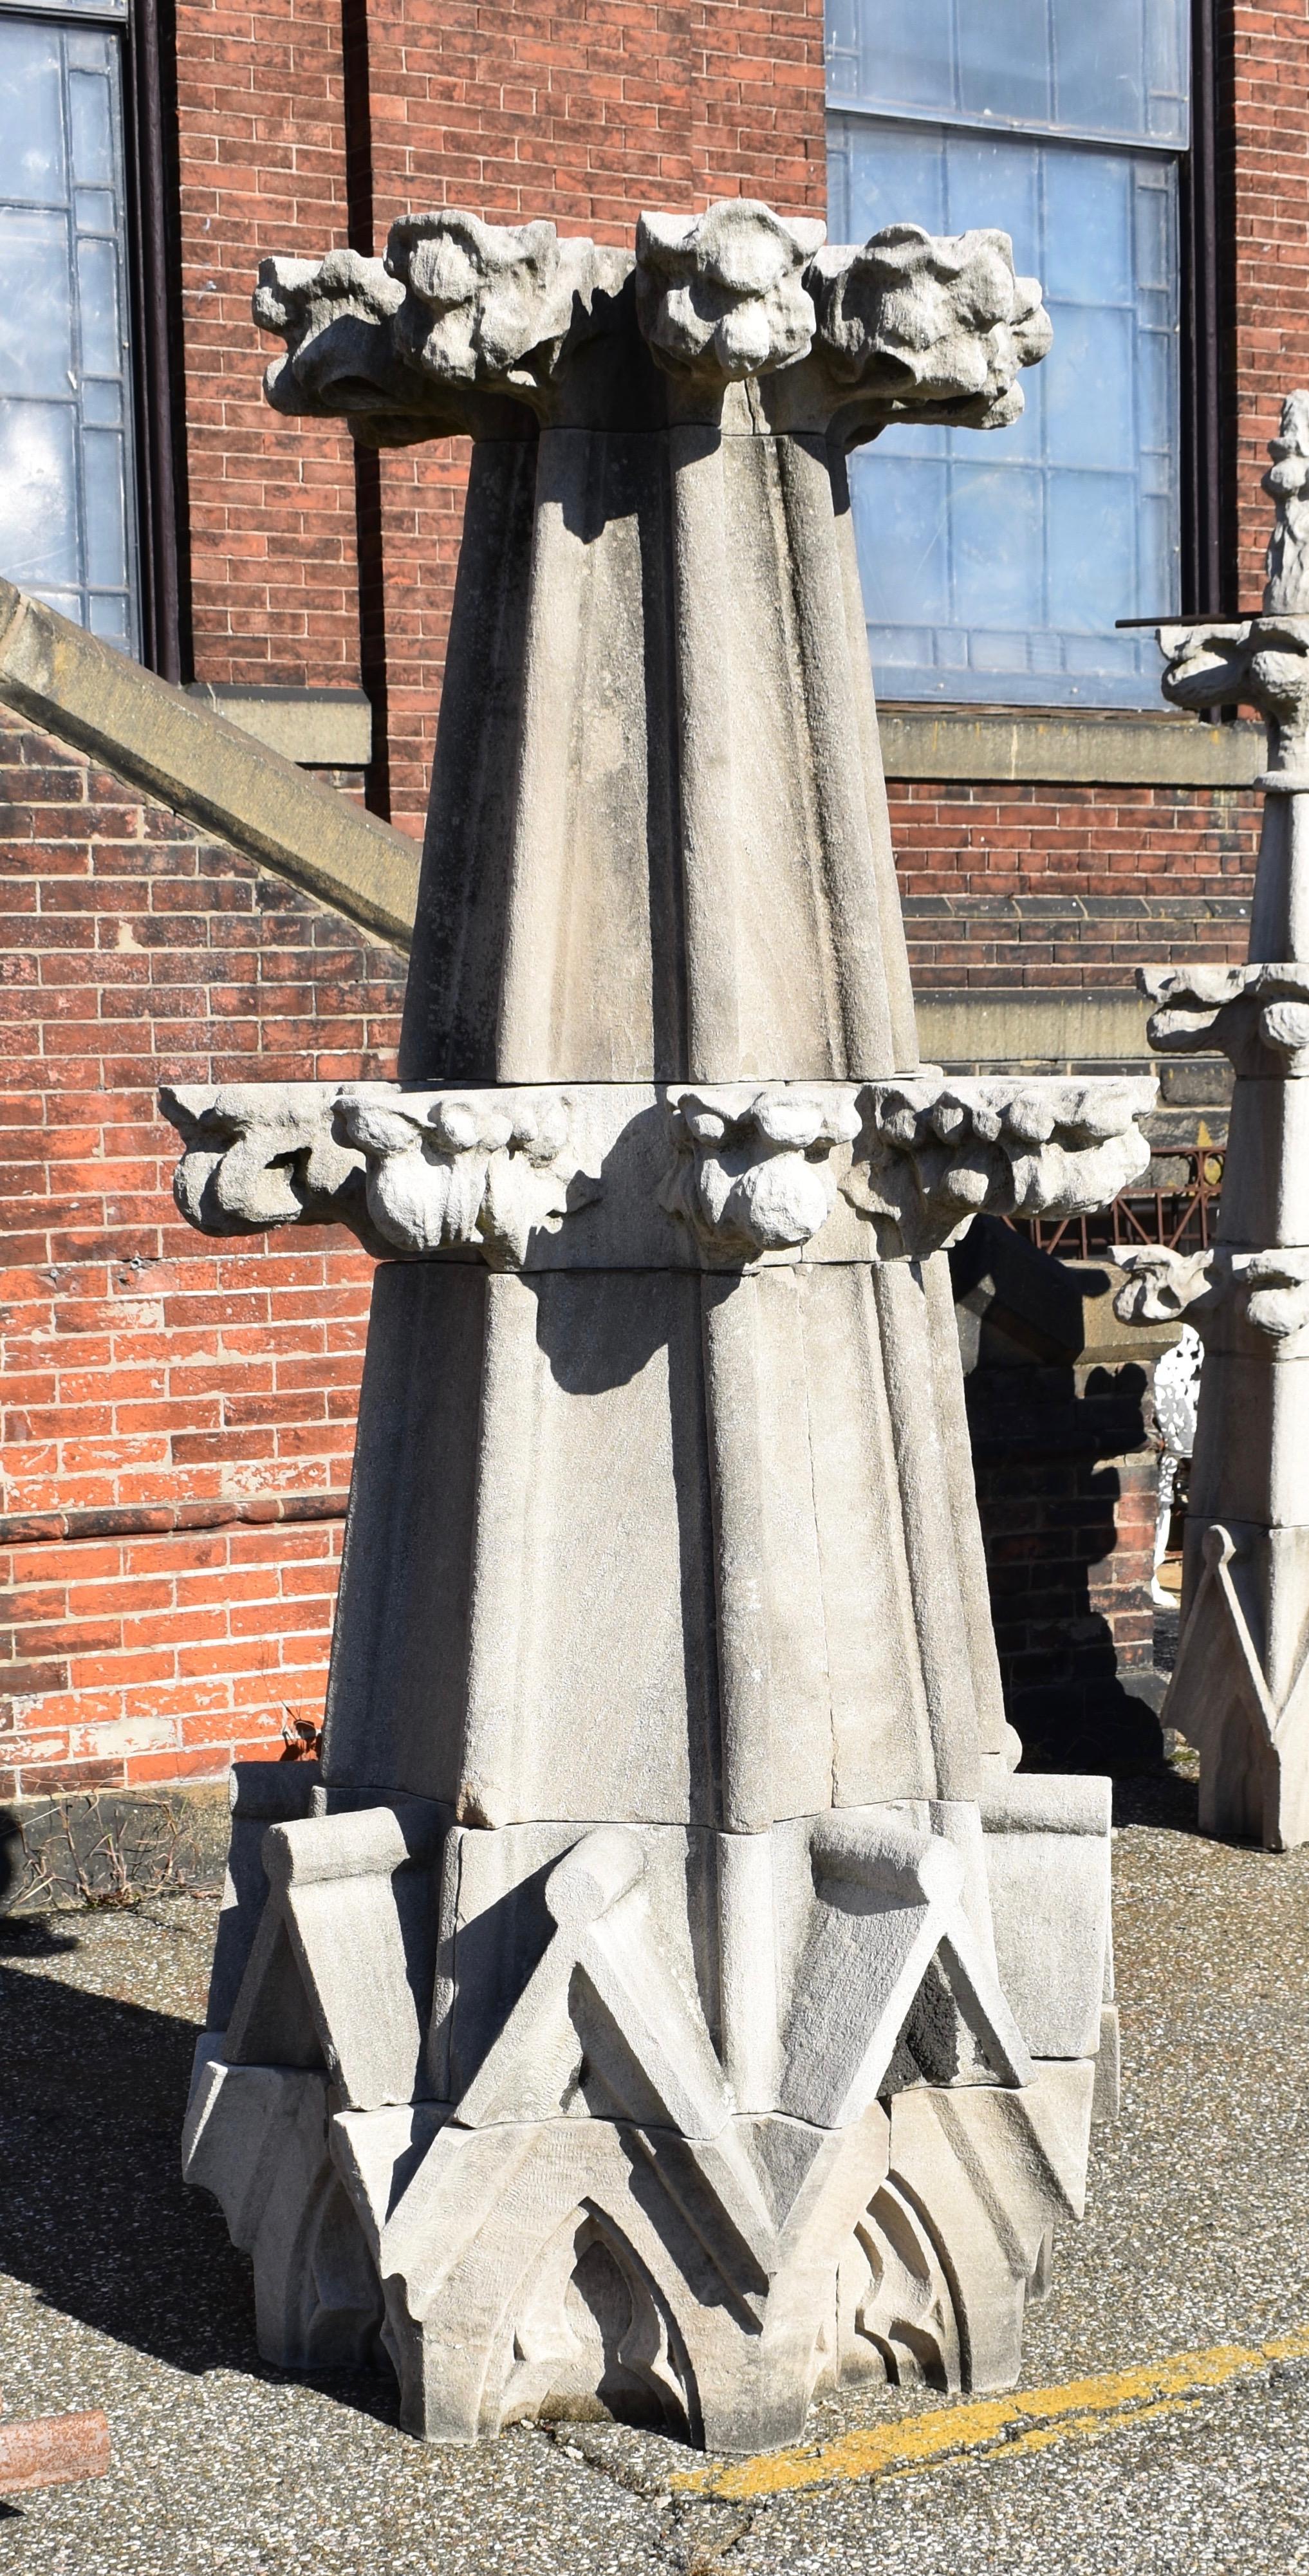 We are offering two late 19th century monumental limestone finials, rescued from a Baltimore cathedral. Each spire is made up of fifteen individual carved stone blocks. The stones can be dry-stacked or permanently mortared together.
Stonework on